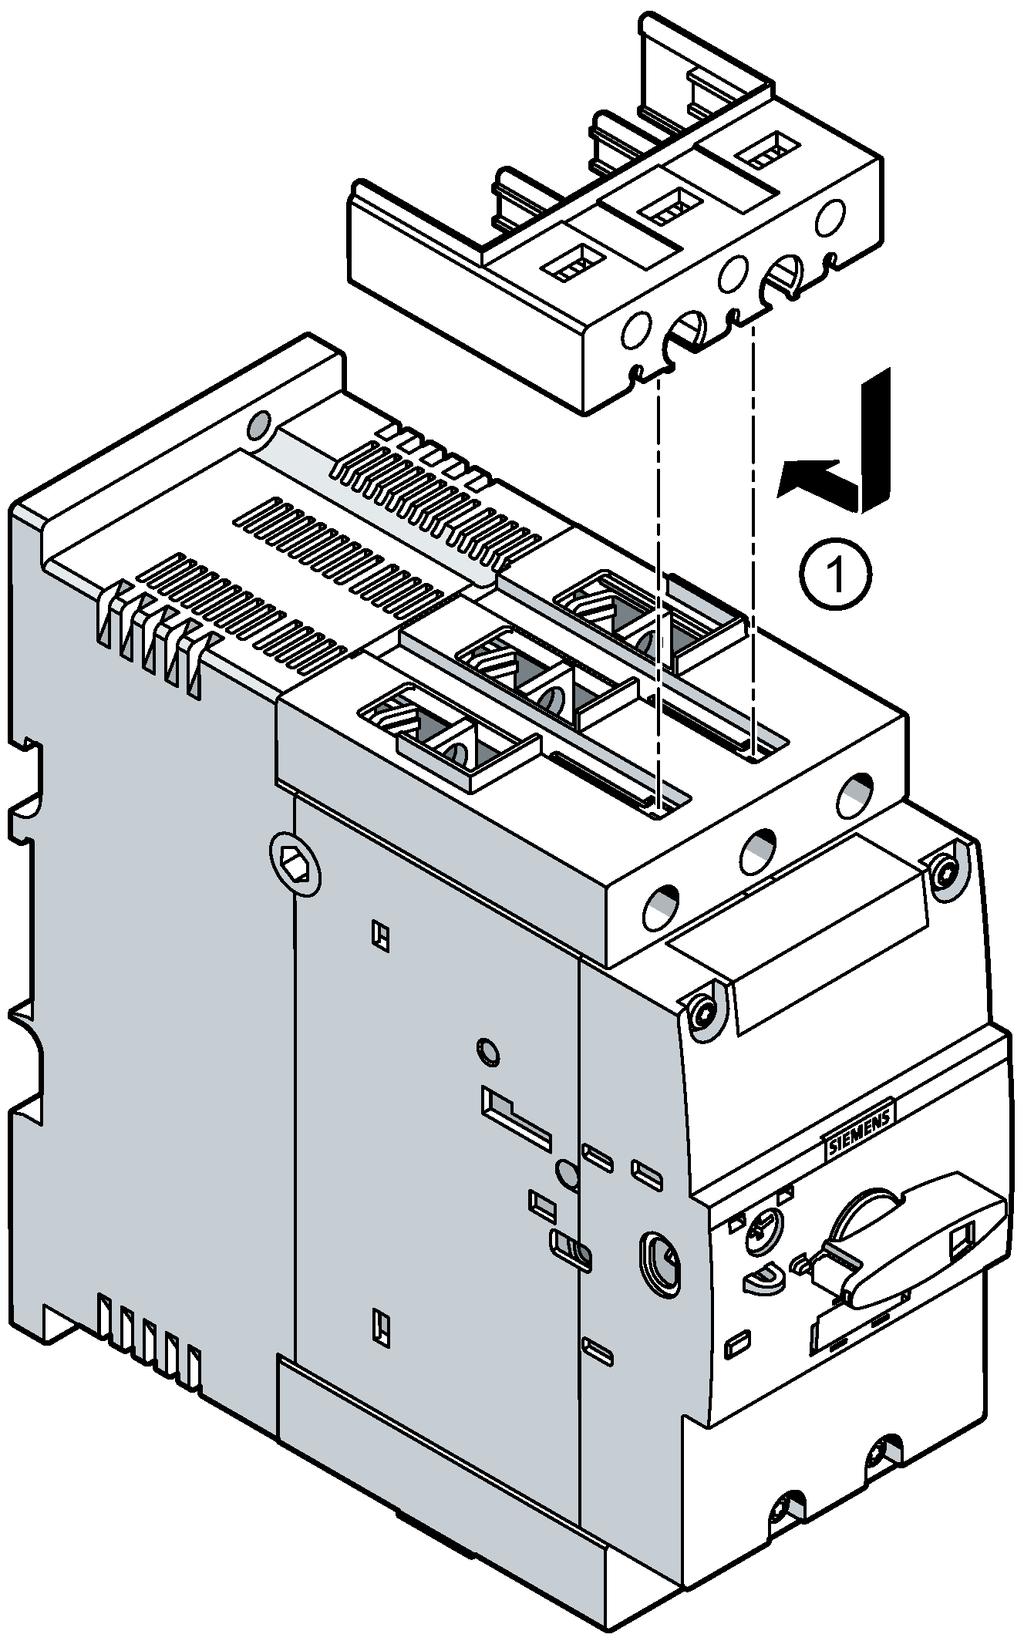 Accessories 10.17 Terminal covers for box terminal block 10.17 Terminal covers for box terminal block 10.17.1 Description Terminal covers for box terminal block Terminal covers for box terminal blocks are available for the motor starter protectors (sizes S2 and S3).